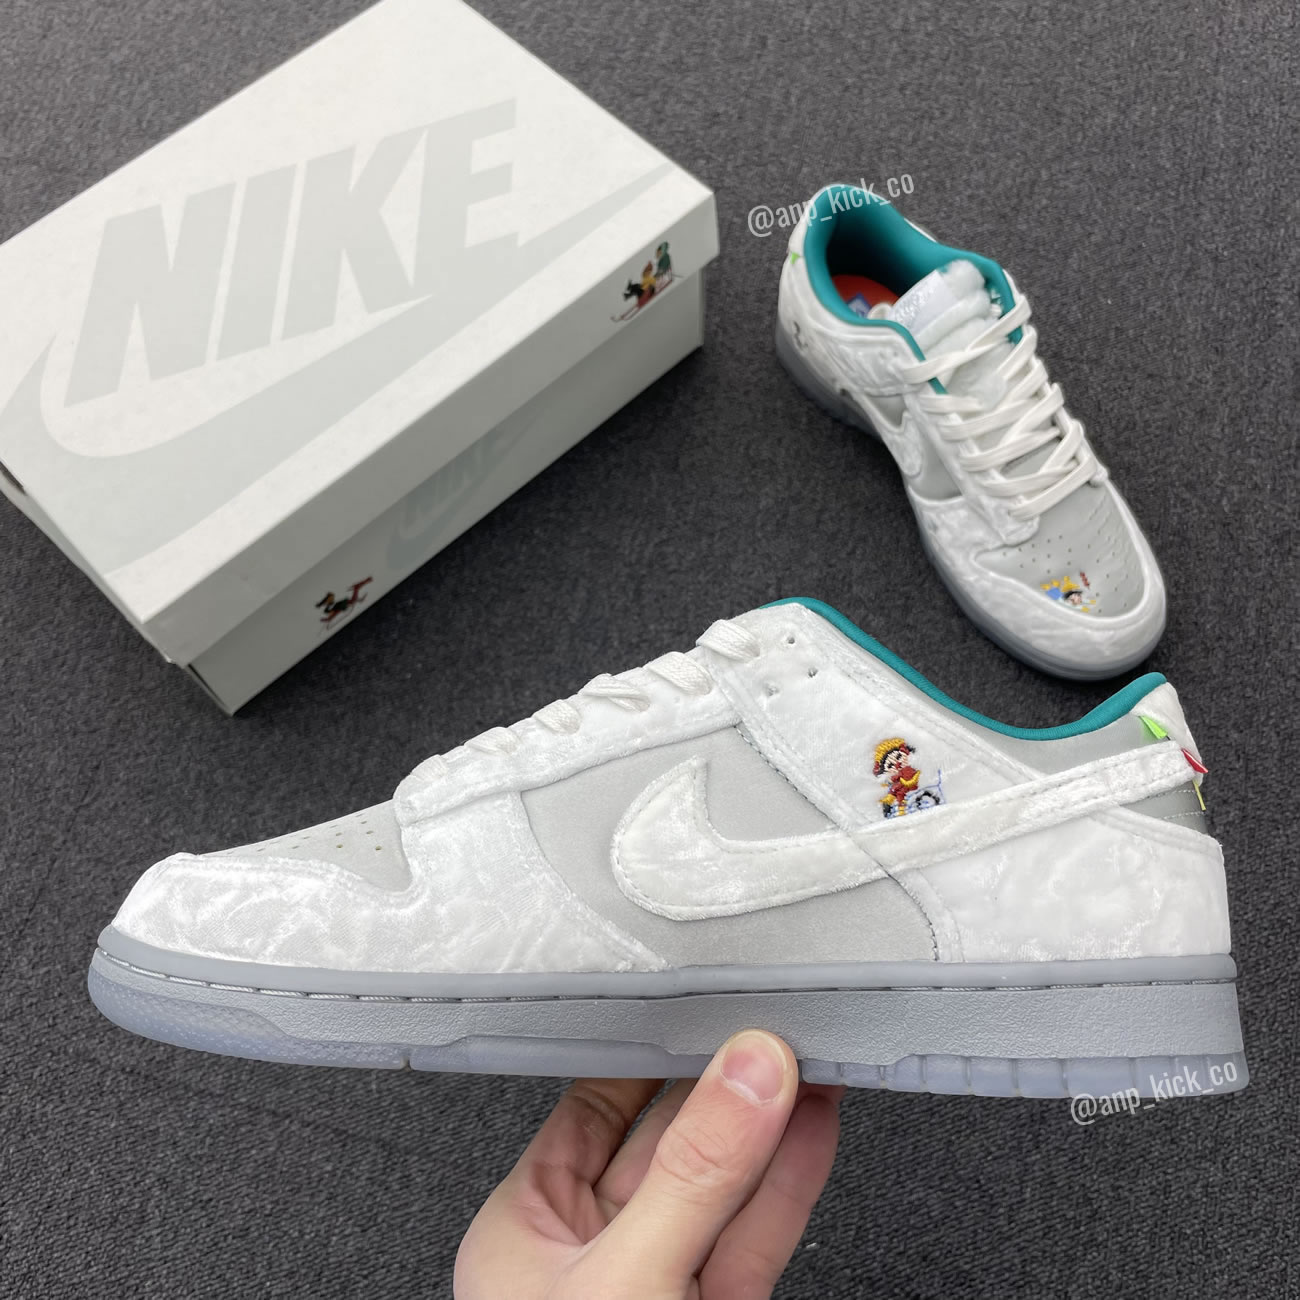 Nike Dunk Low "ICE" White/Silver-Blue DO2326-001